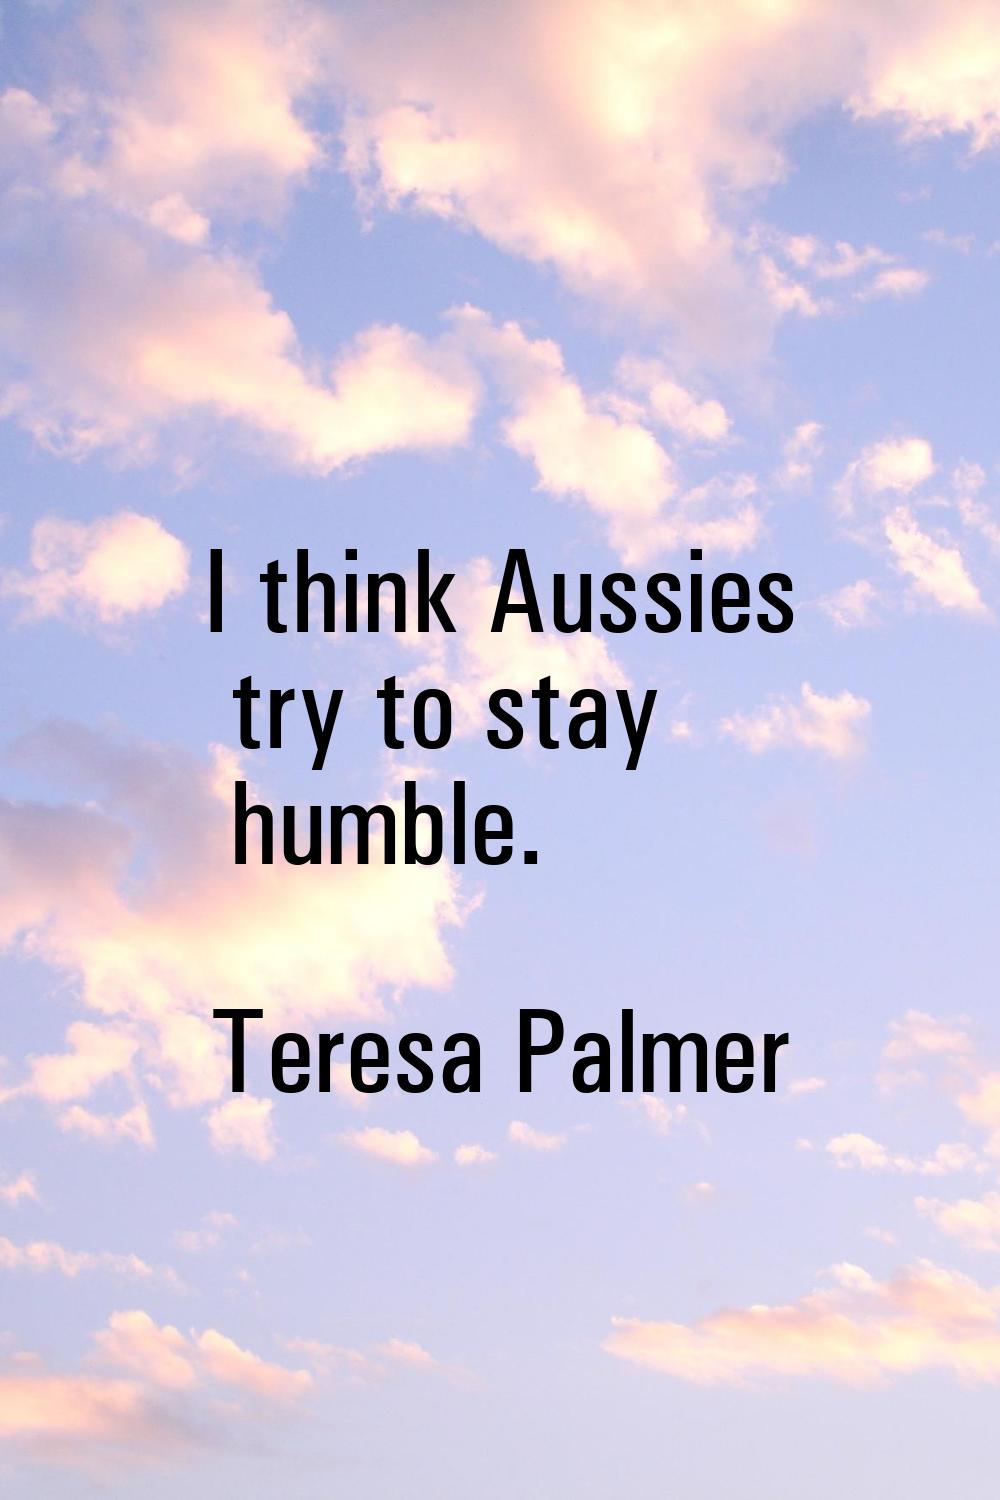 I think Aussies try to stay humble.